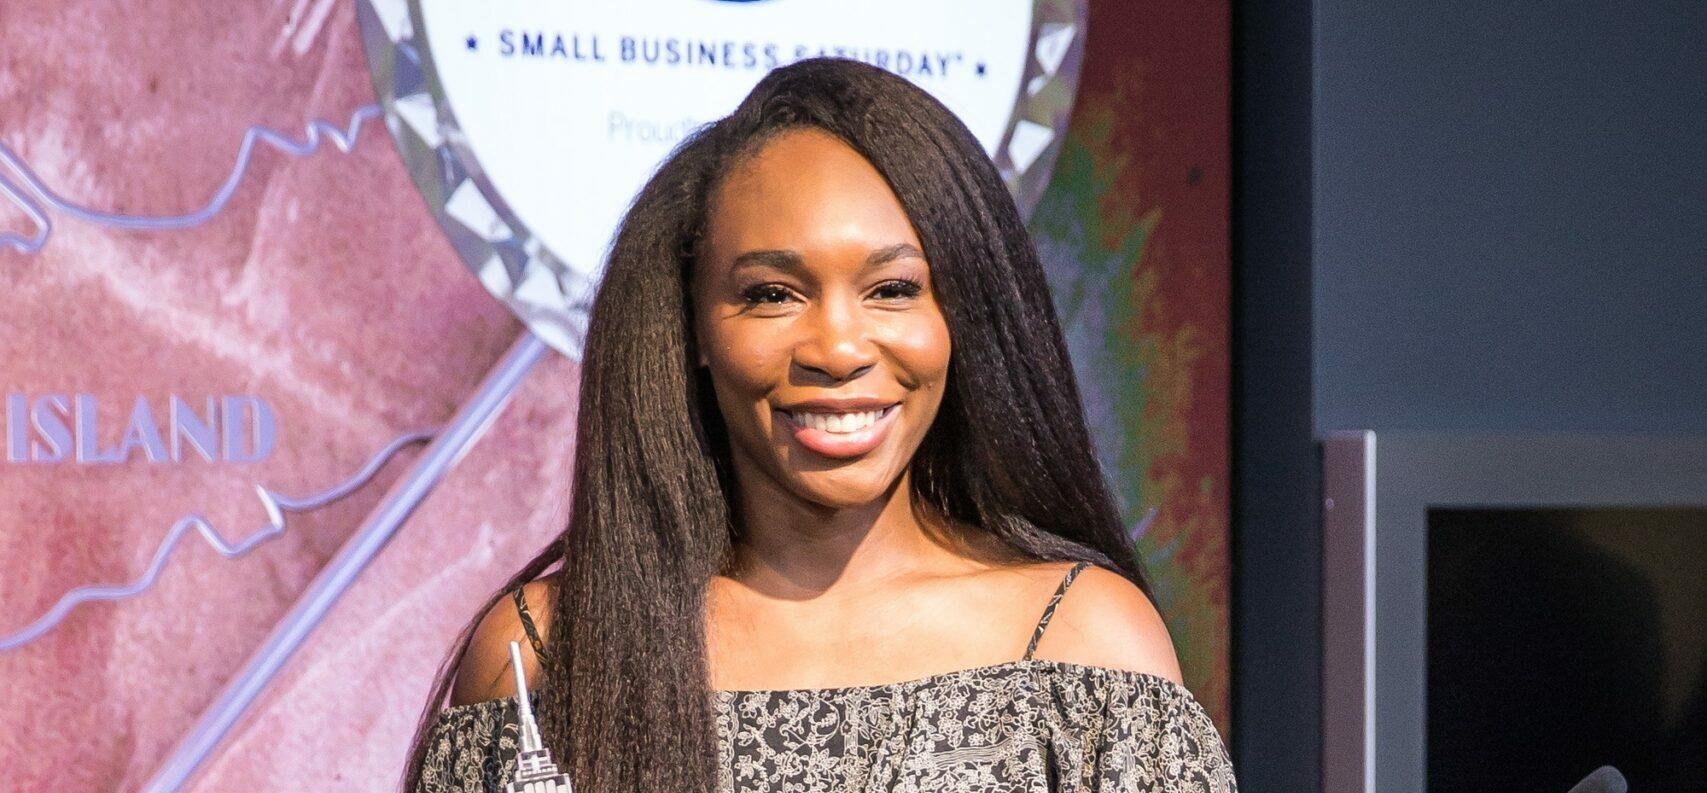 Venus Williams visits the Empire State Building in support of Small Business Saturday.